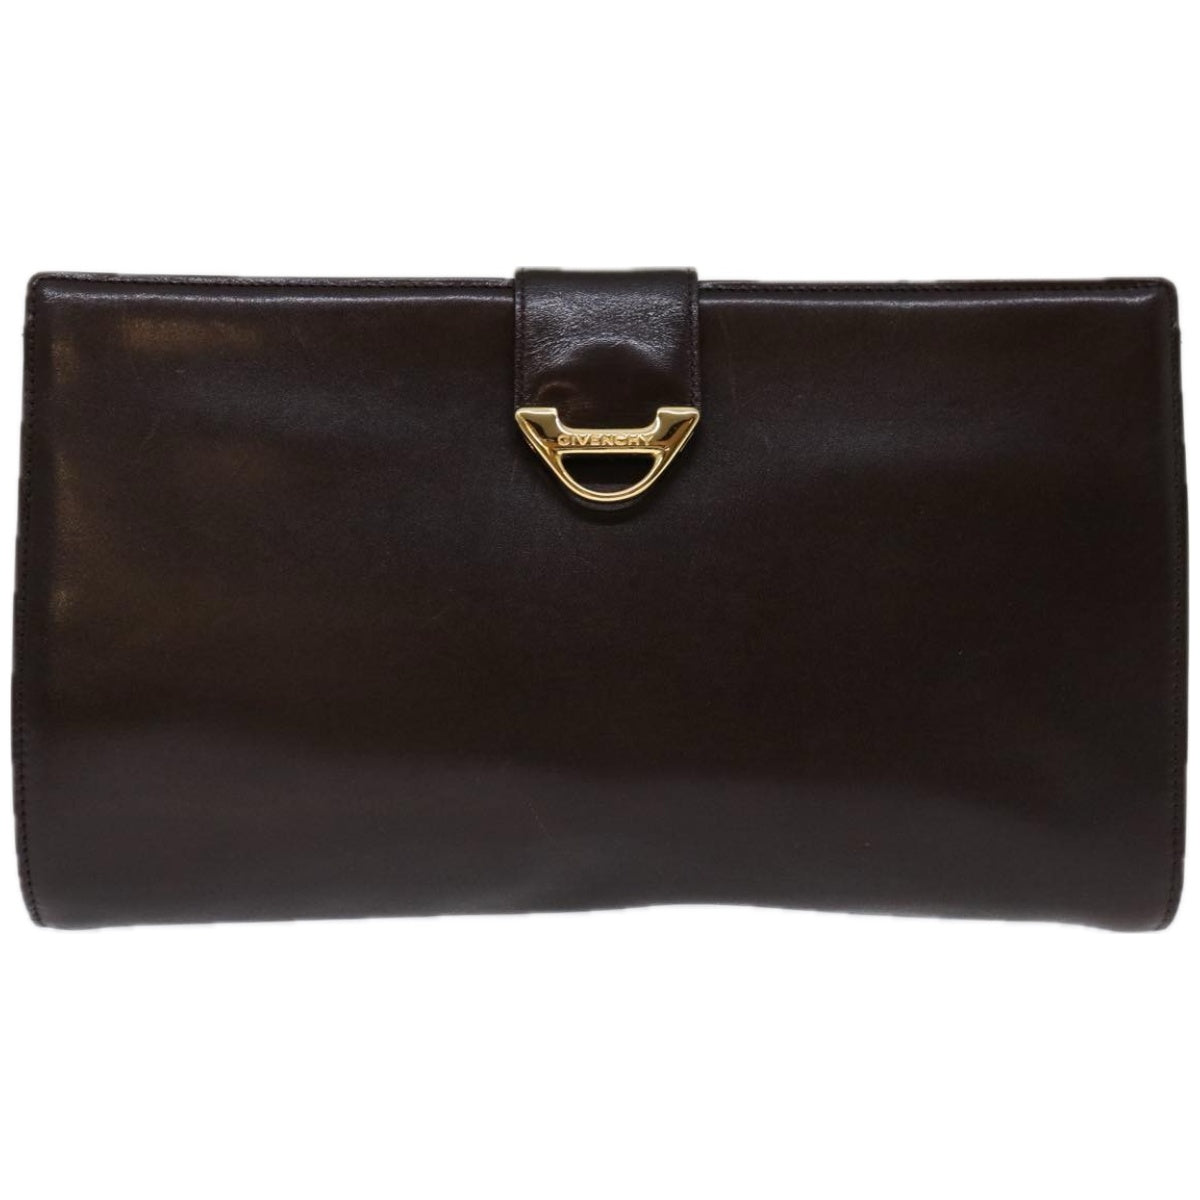 GIVENCHY Clutch Bag Leather Brown Auth bs12406 - 0